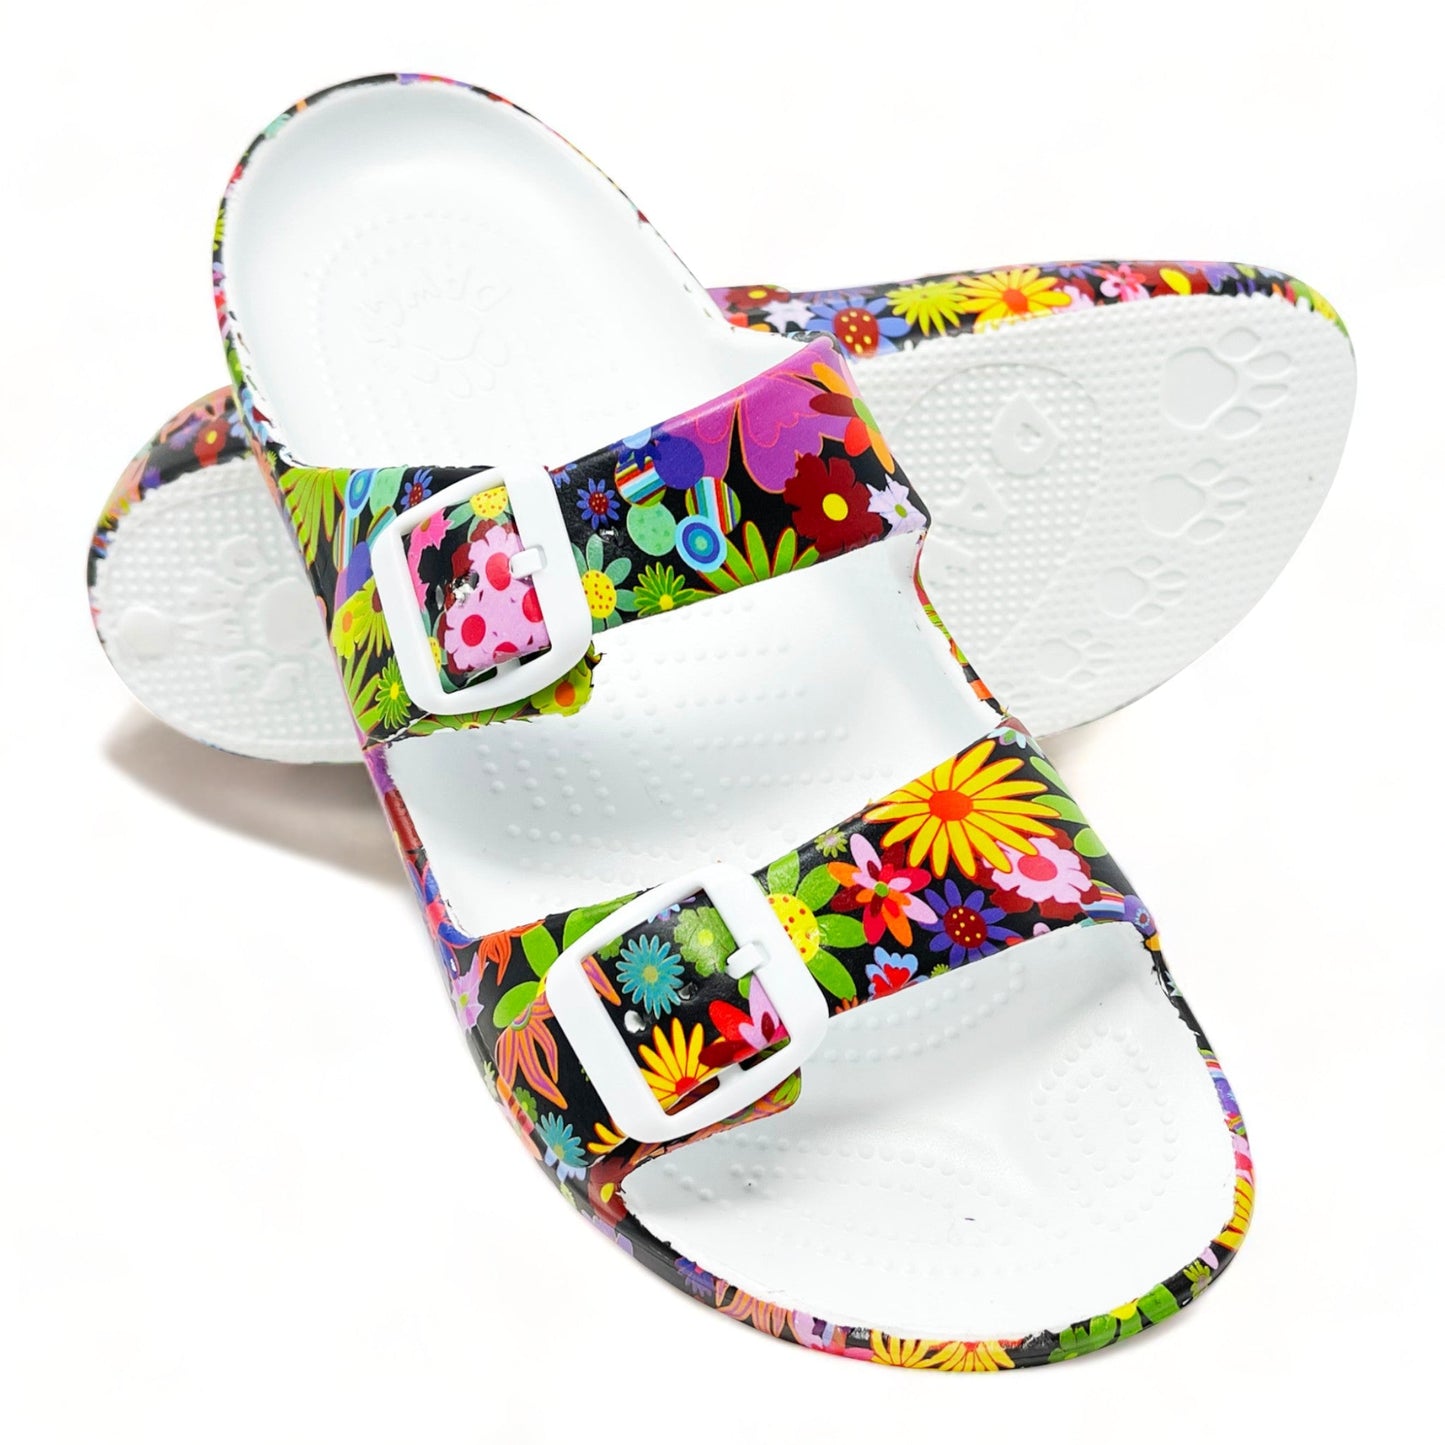 Women's PAW Print Adjustable 2-Strap Sandals by DAWGS USA